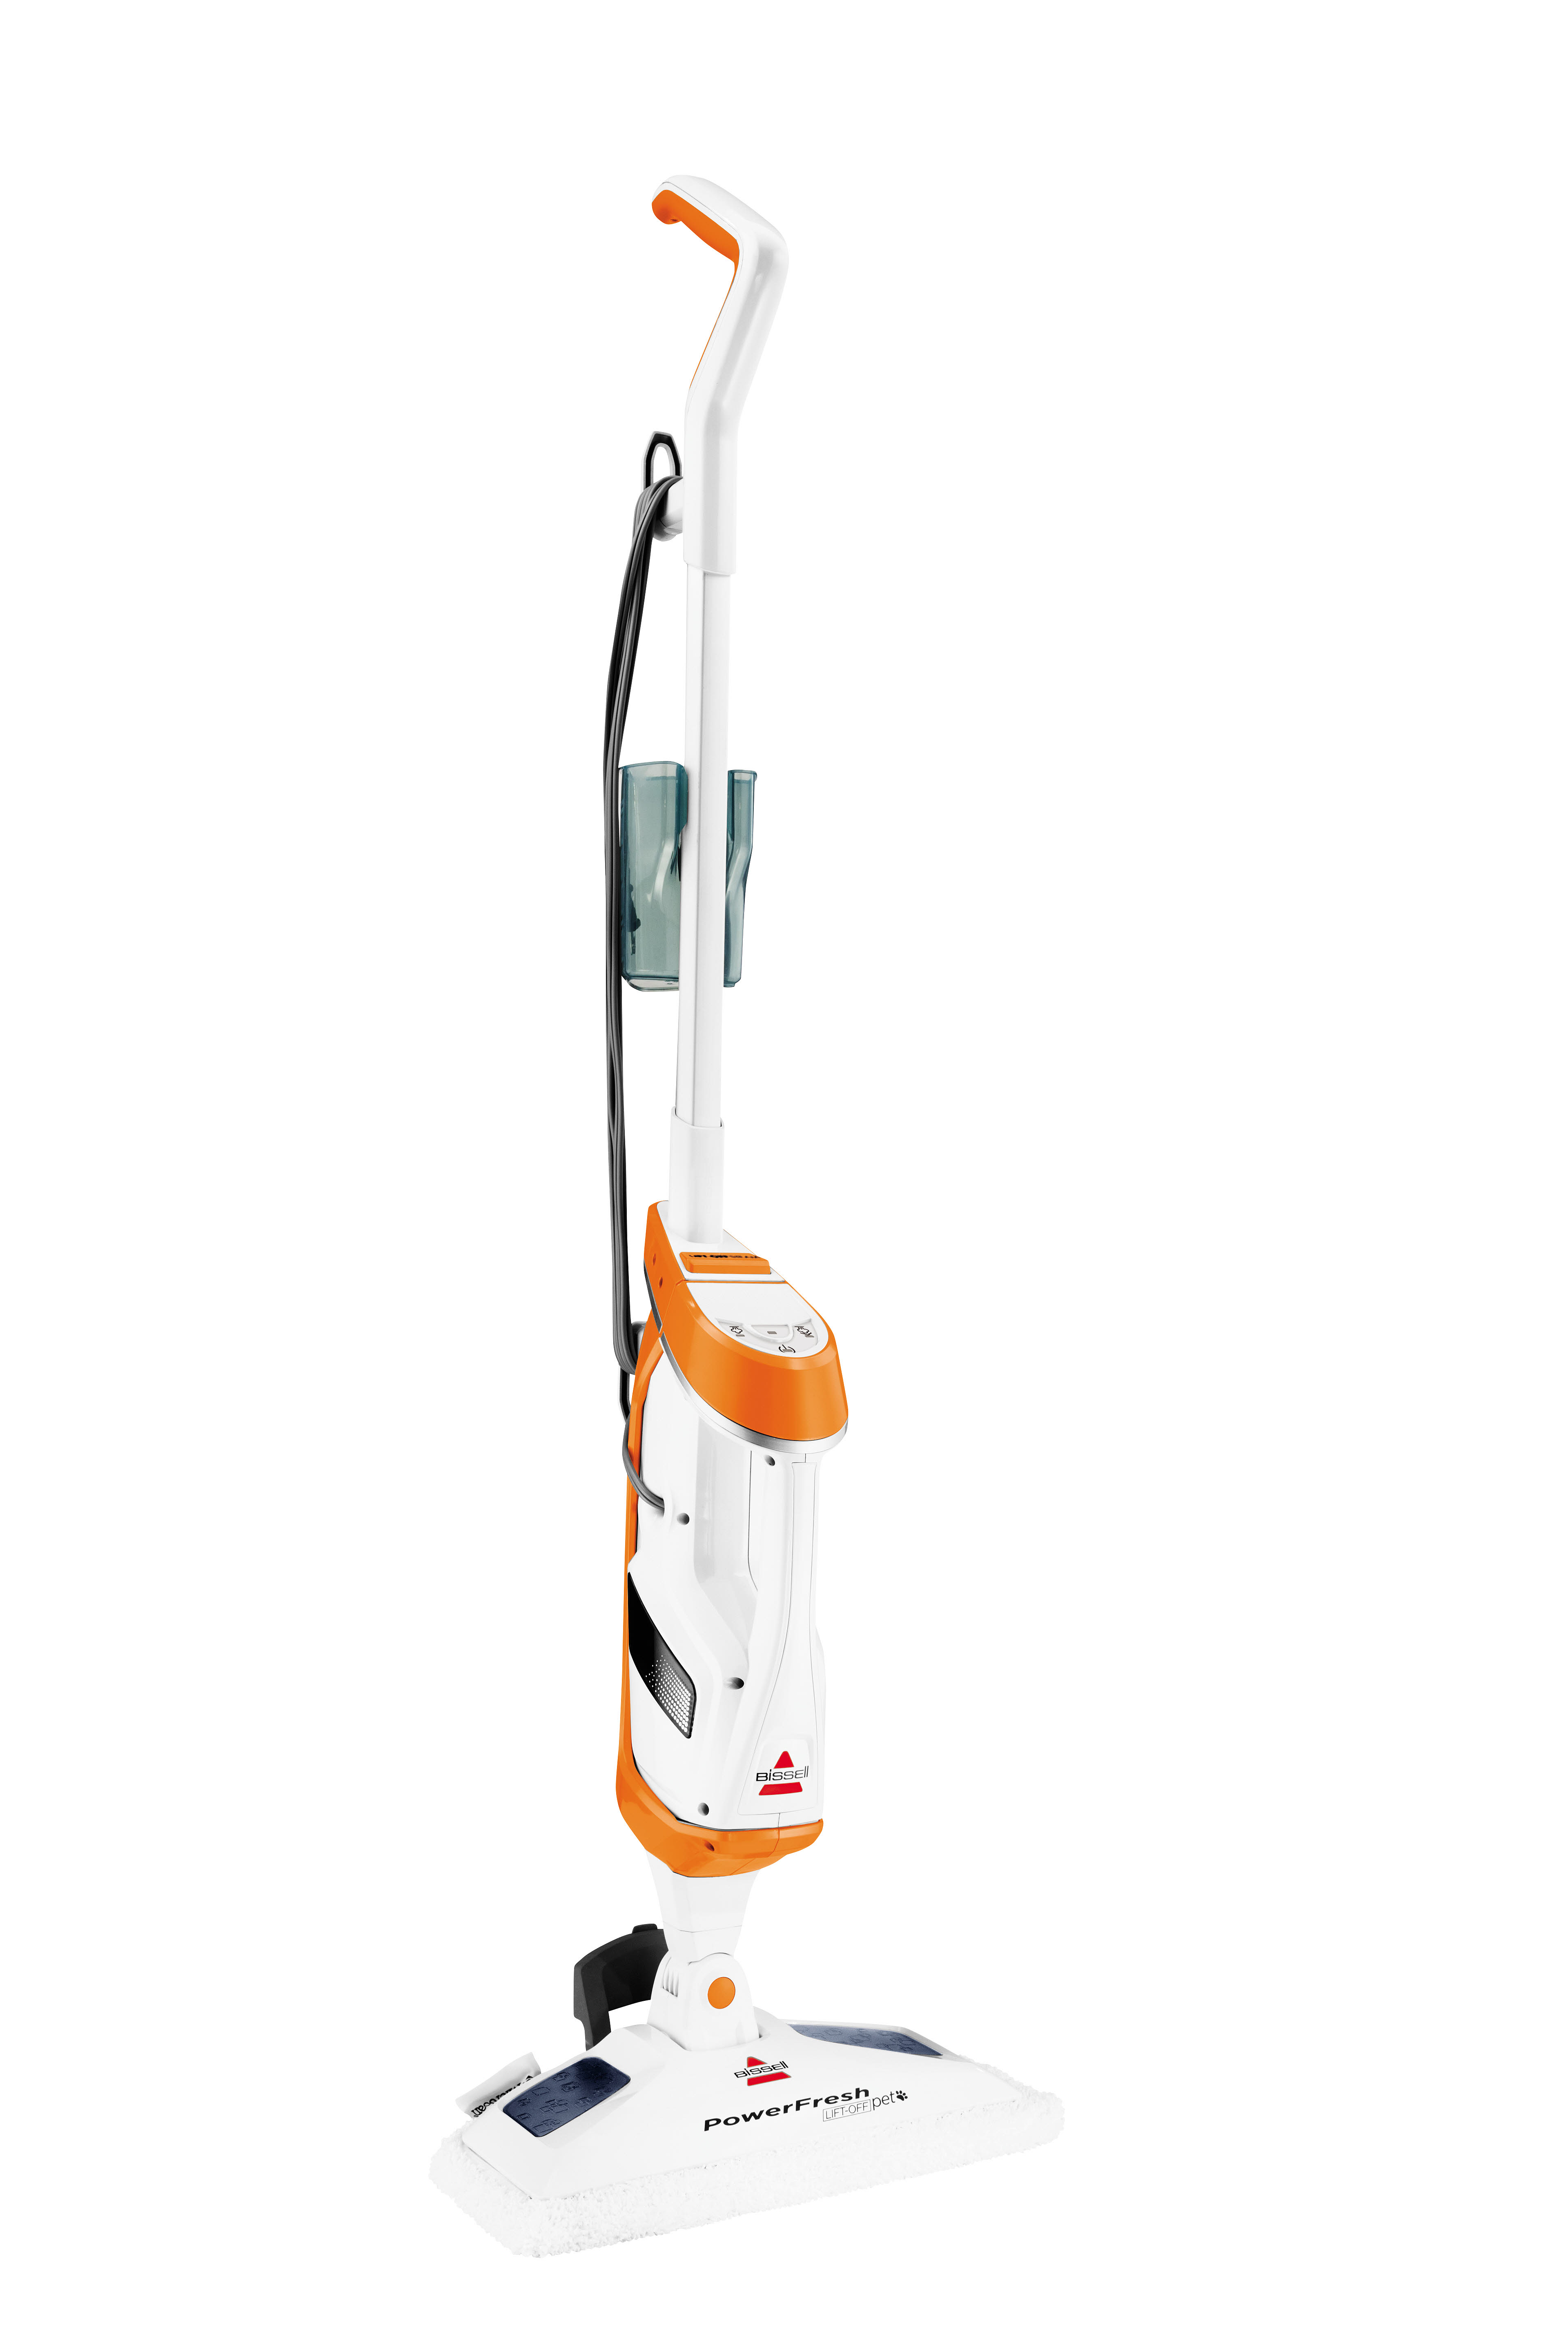 BISSELL PowerFresh Lift-Off Pet 2-in-1 Steam Mop, 1544A - image 3 of 14